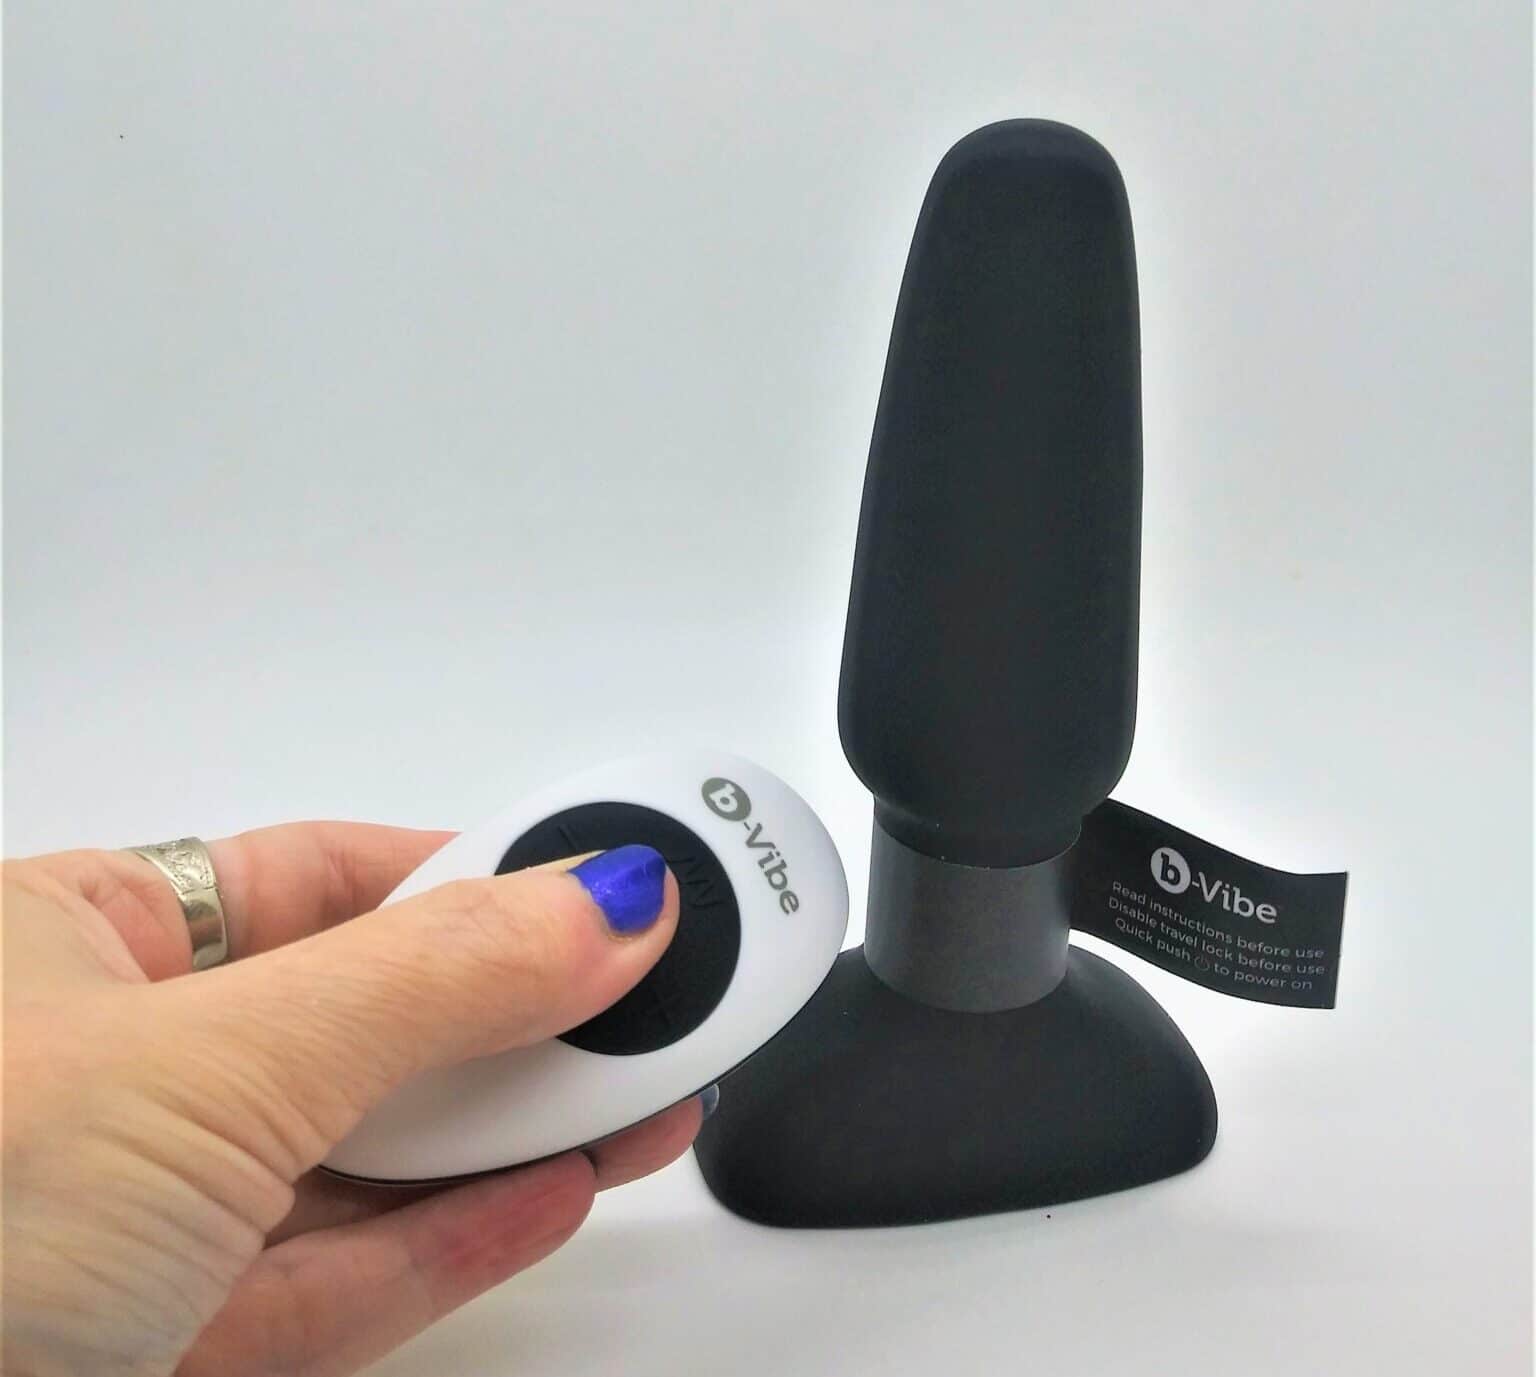 b-Vibe Remote Control Rechargeable Vibrating Rimming Butt Plug. Slide 4